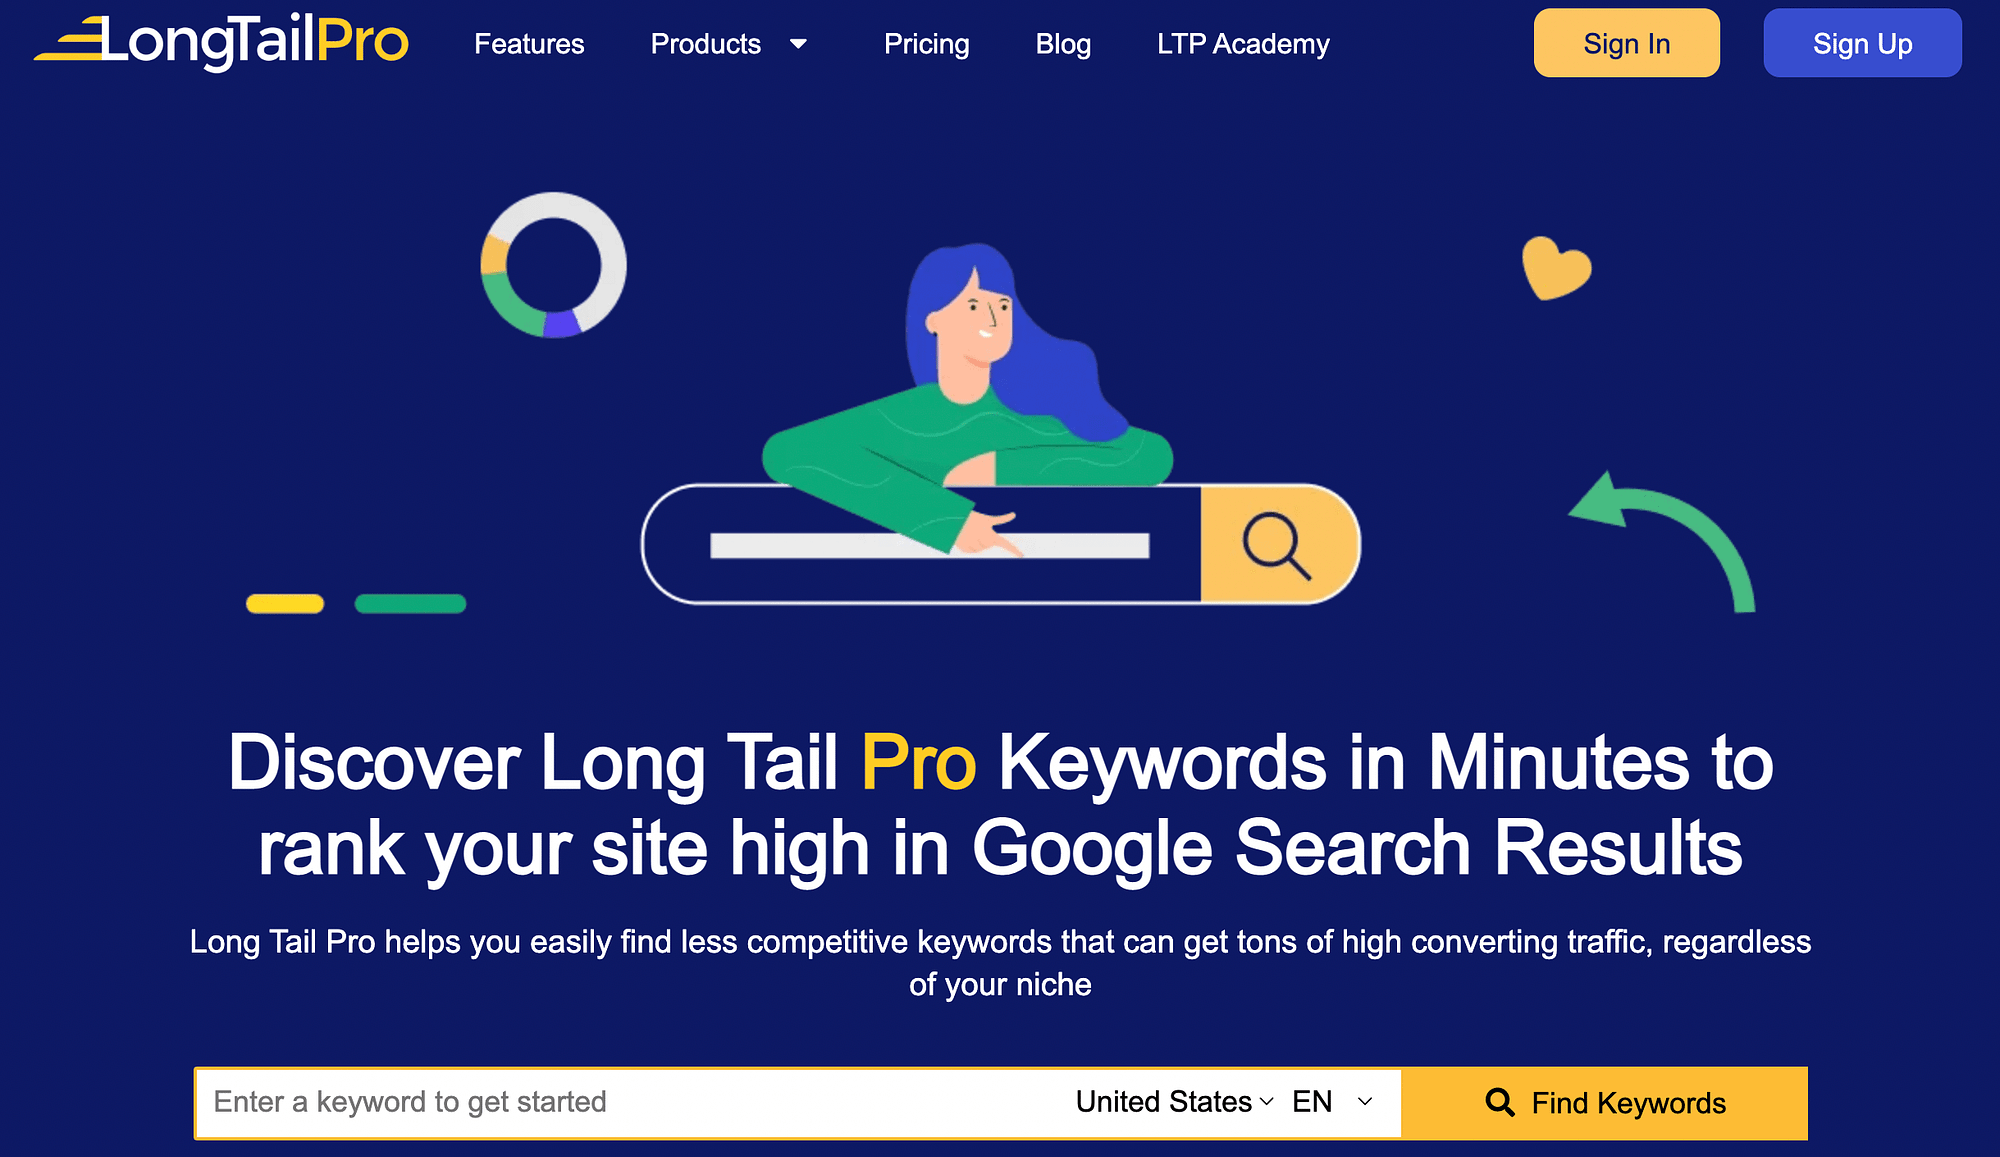 Long Tail Pro is one of the best keyword research tools that's designed for identifying long tail keyword opportunities